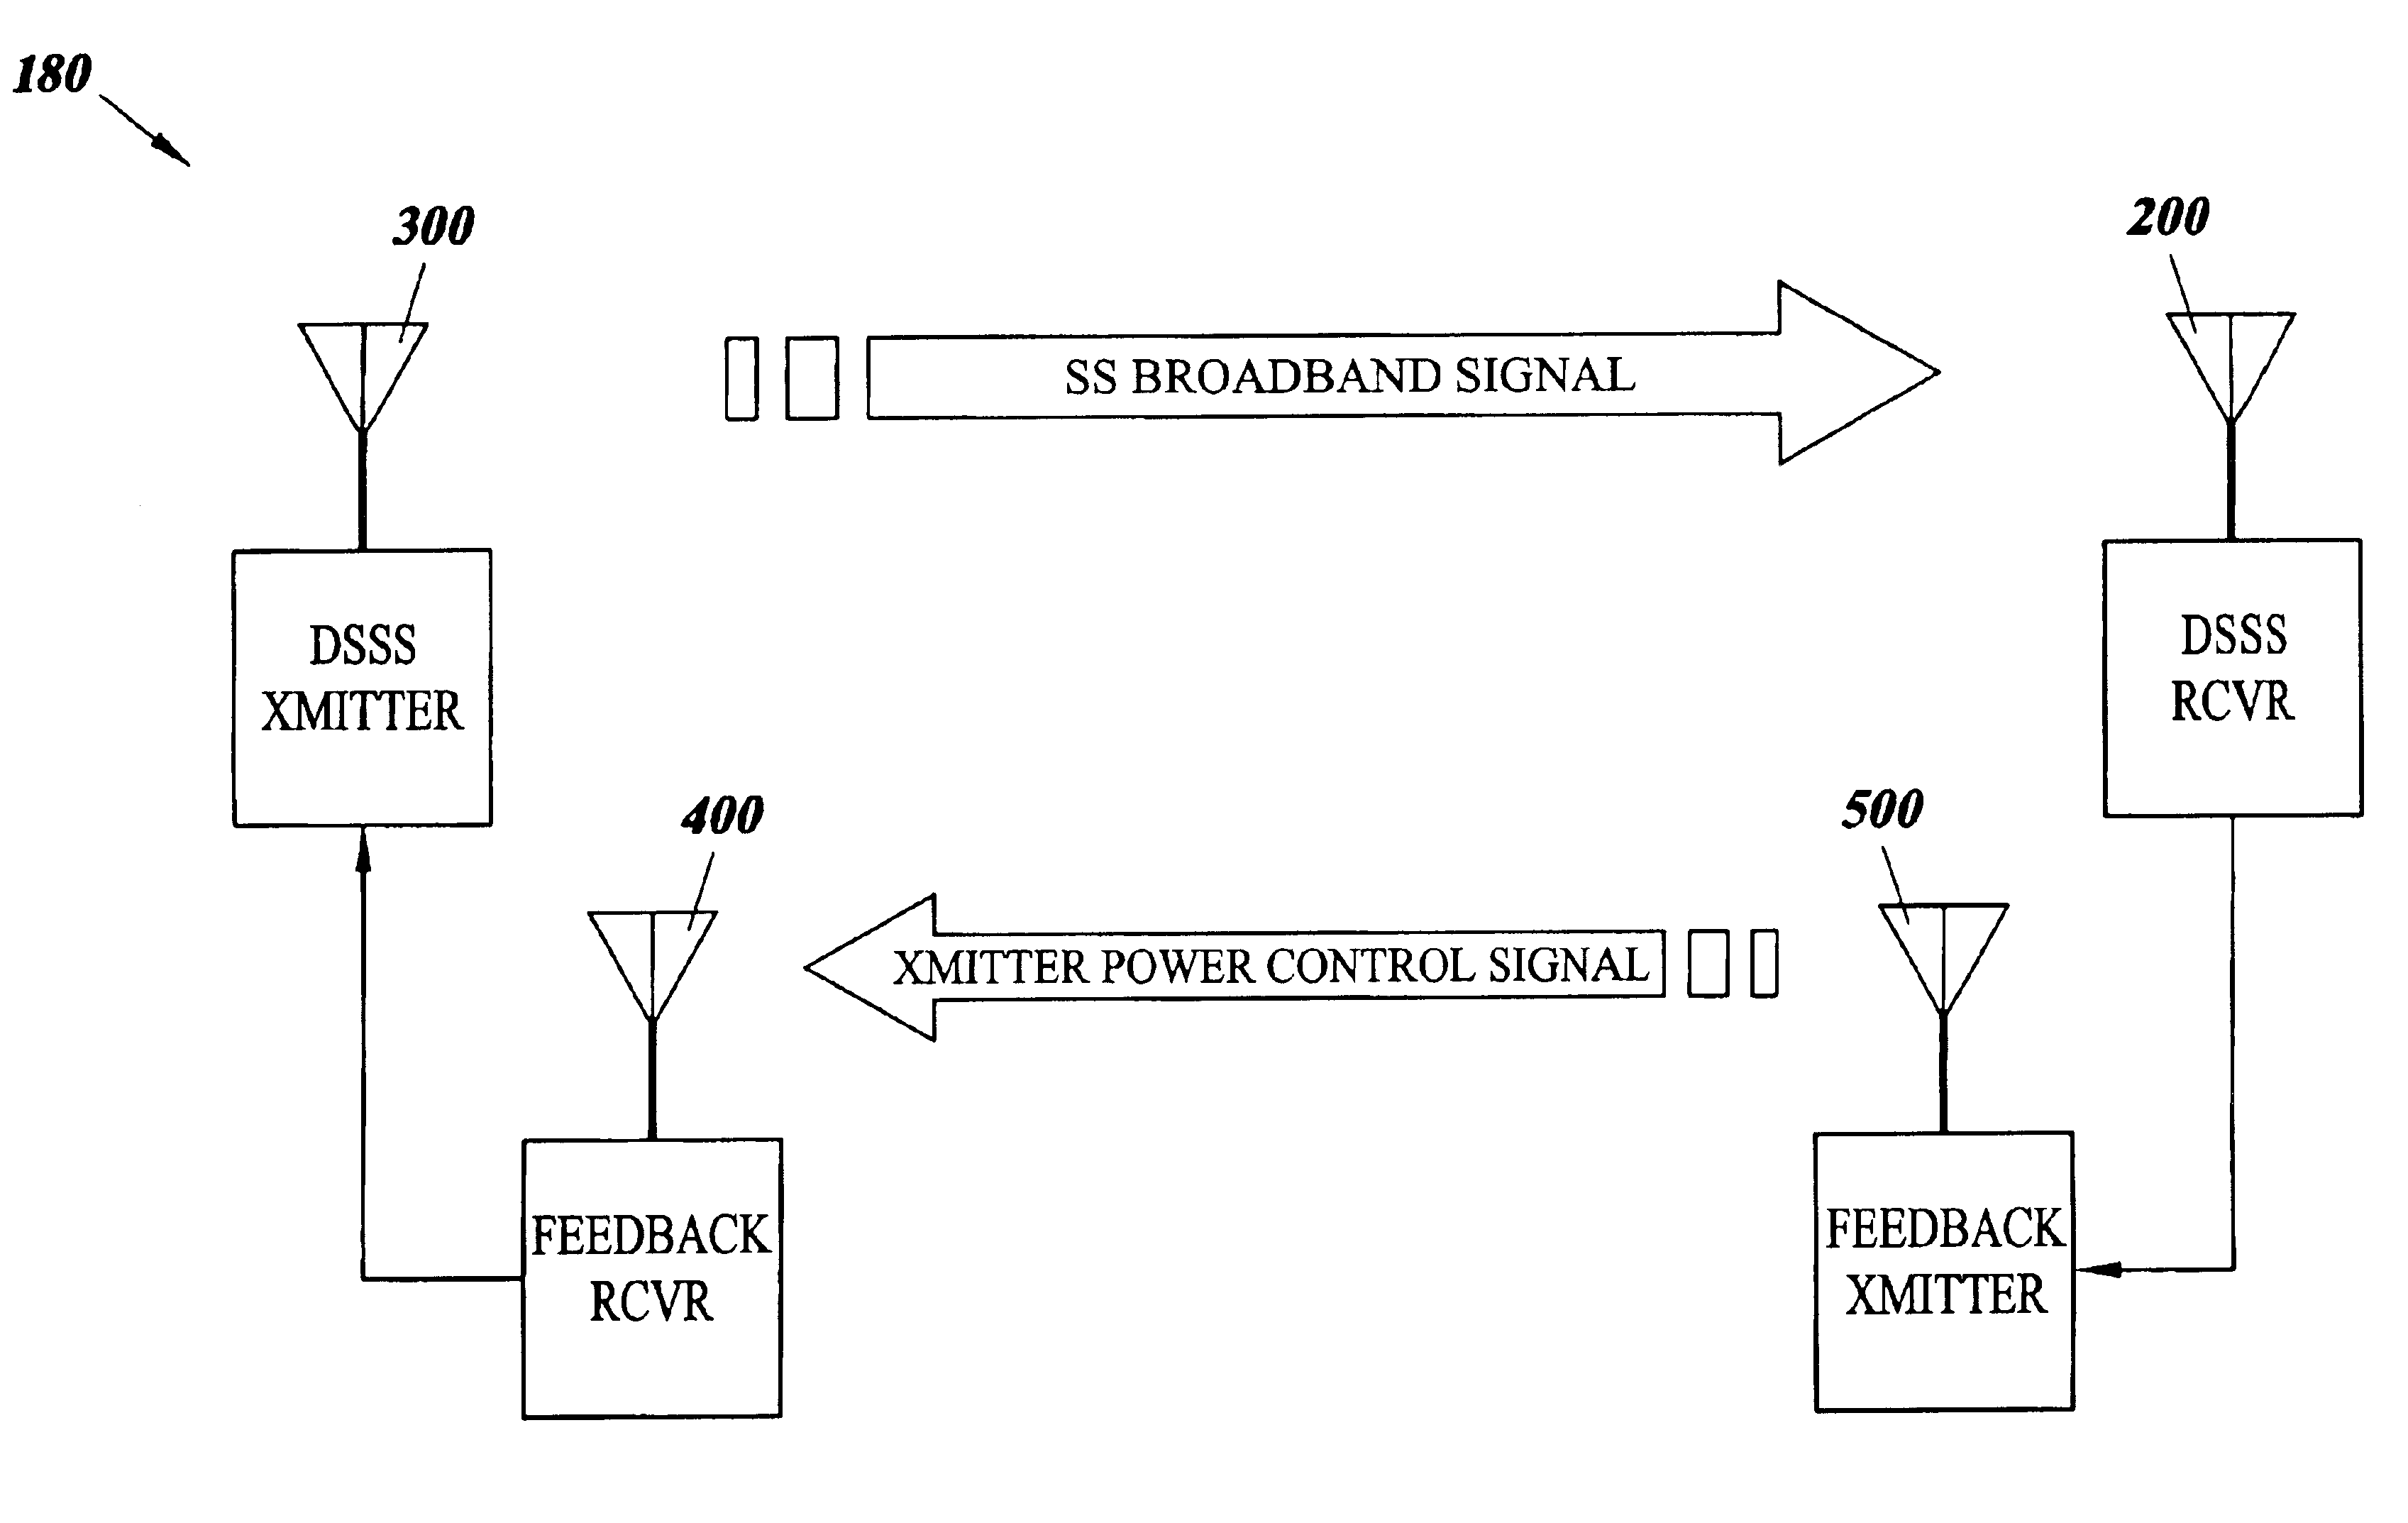 Methods and systems for optimizing signal transmission power levels in a spread spectrum communication system